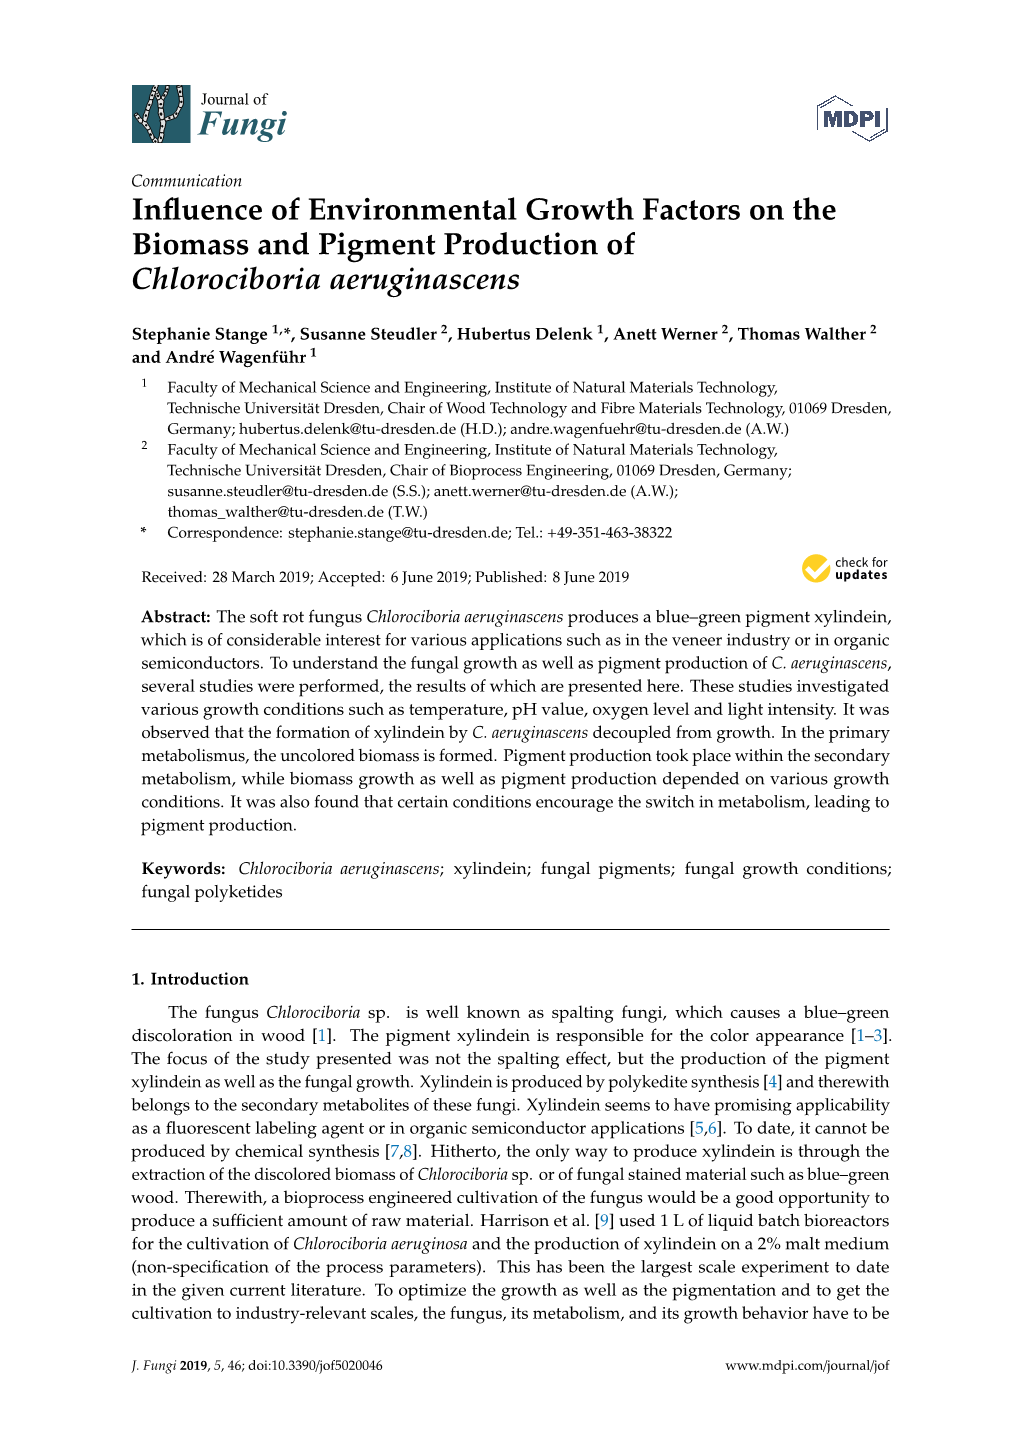 Influence of Environmental Growth Factors on the Biomass And